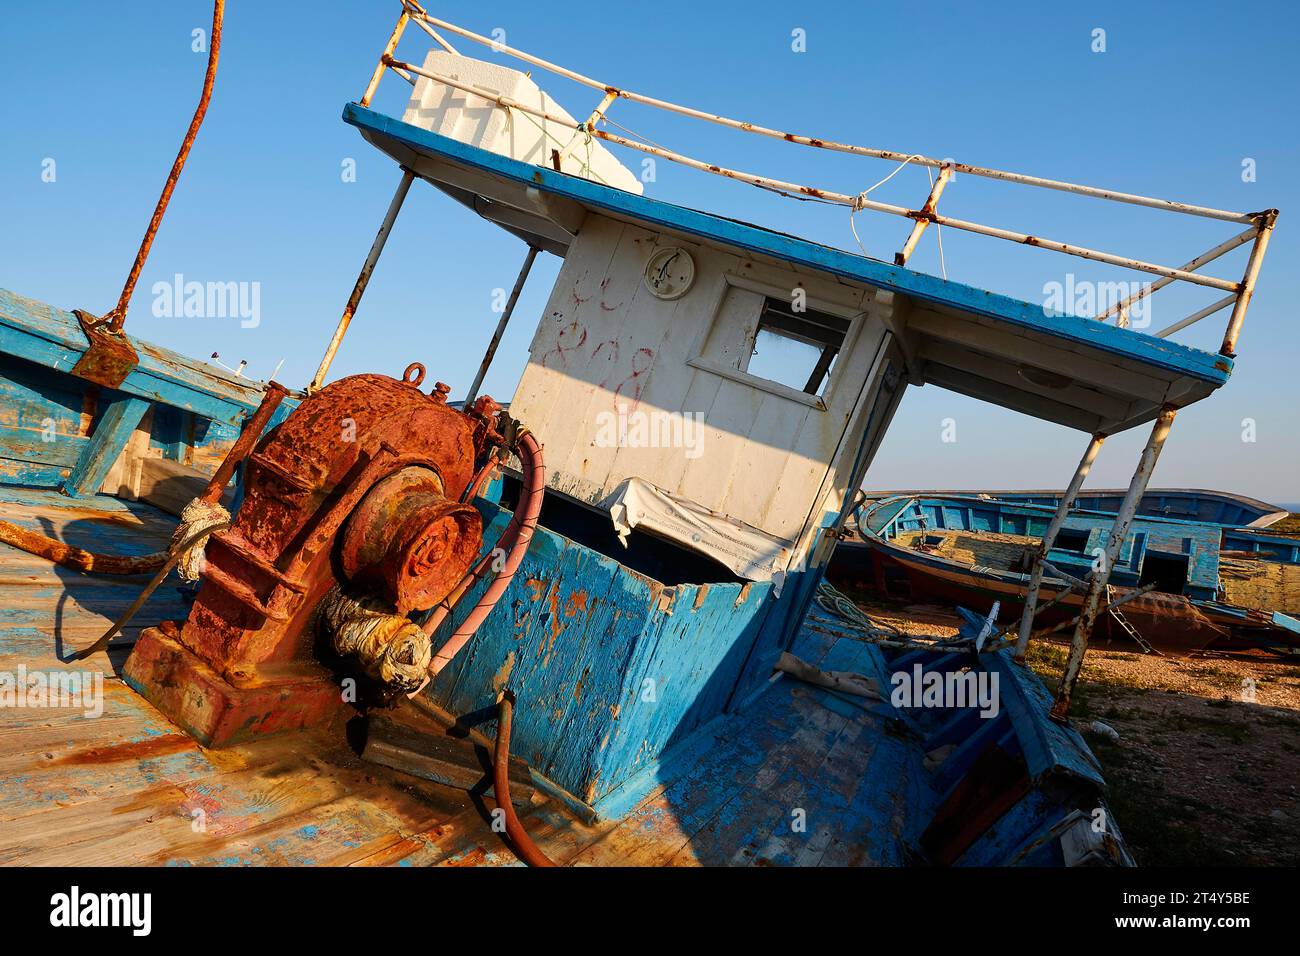 Cabin, rusted winches, details, refugee boats, Cimitero delle barche, boat graveyard, boat wrecks, cloudless blue sky, Lampedusa Island, Agrigento Stock Photo